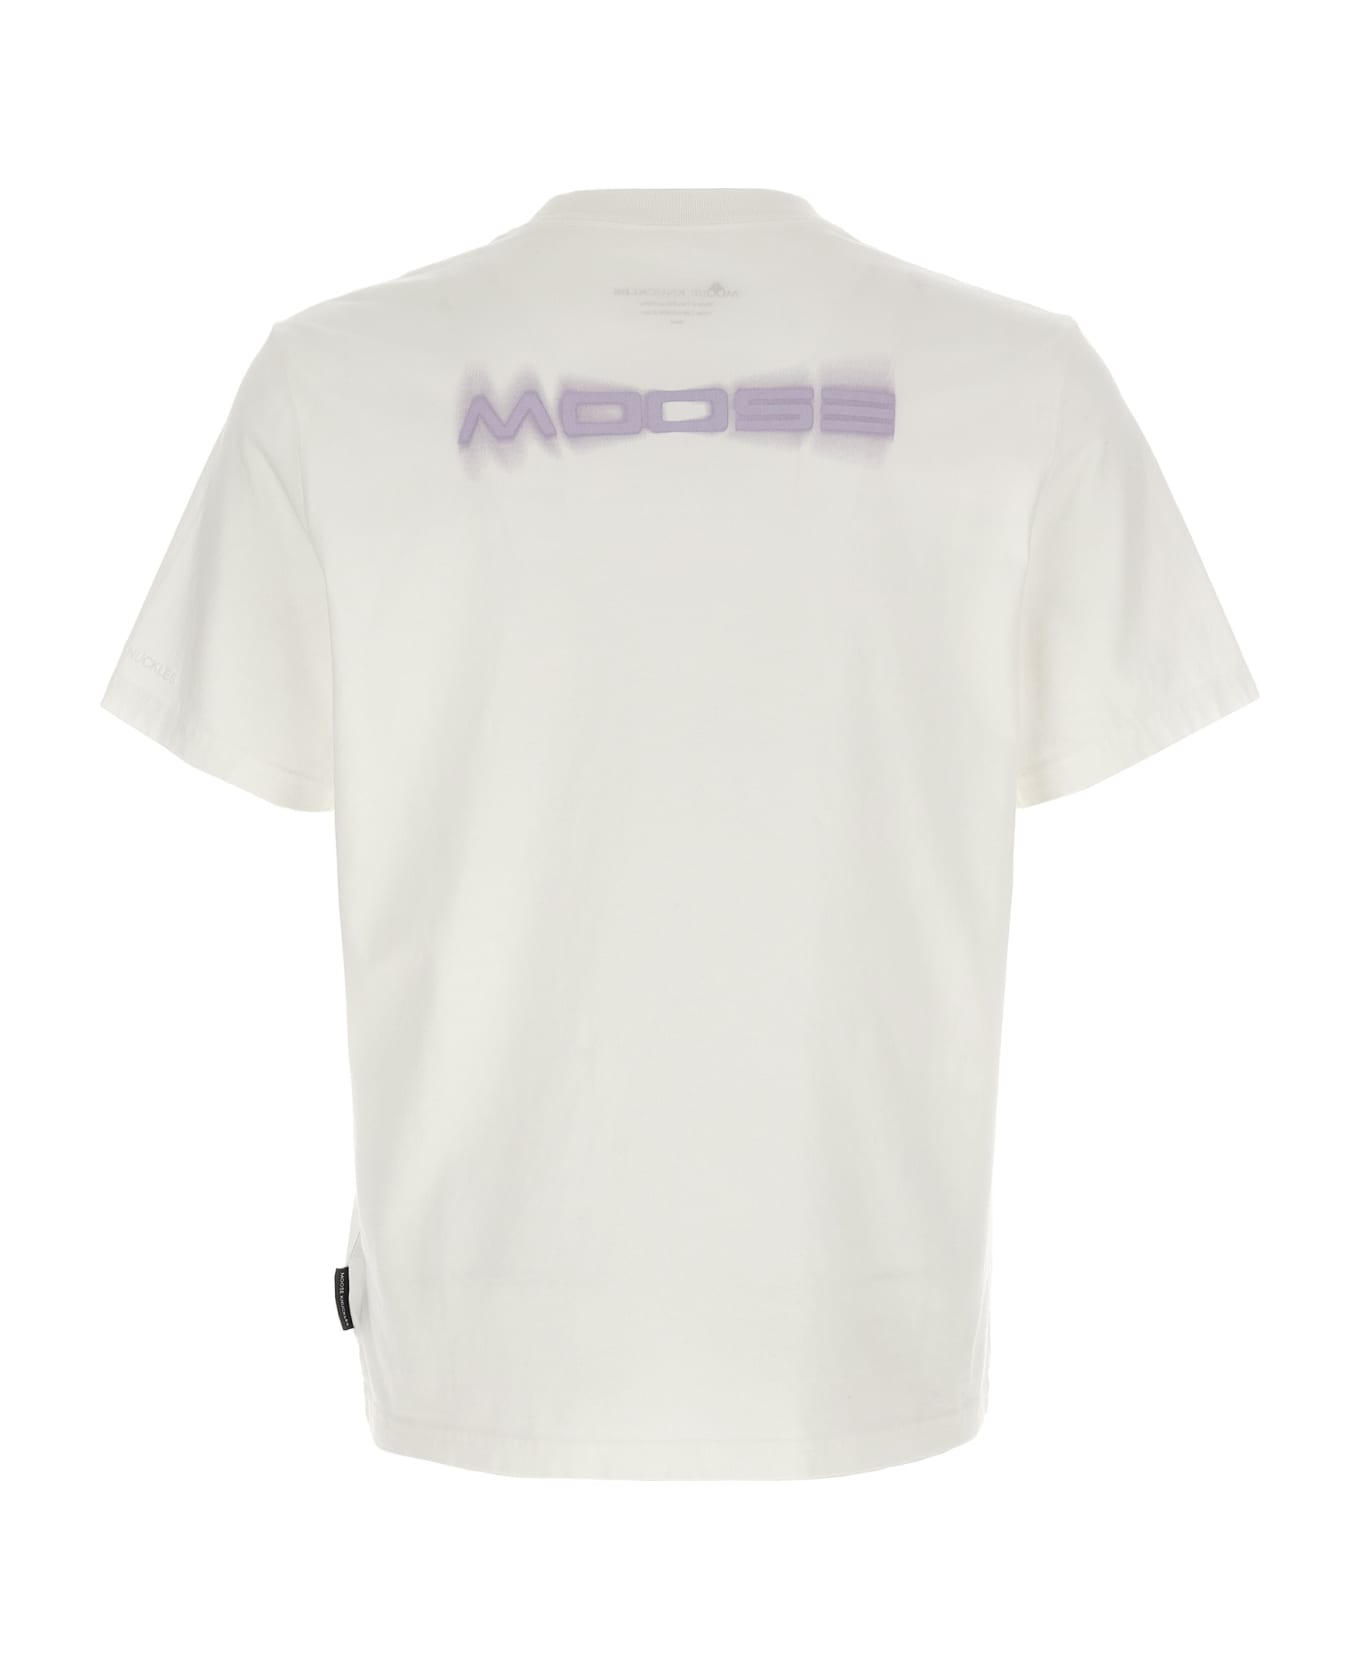 Moose Knuckles 'maurice' T-shirt - White